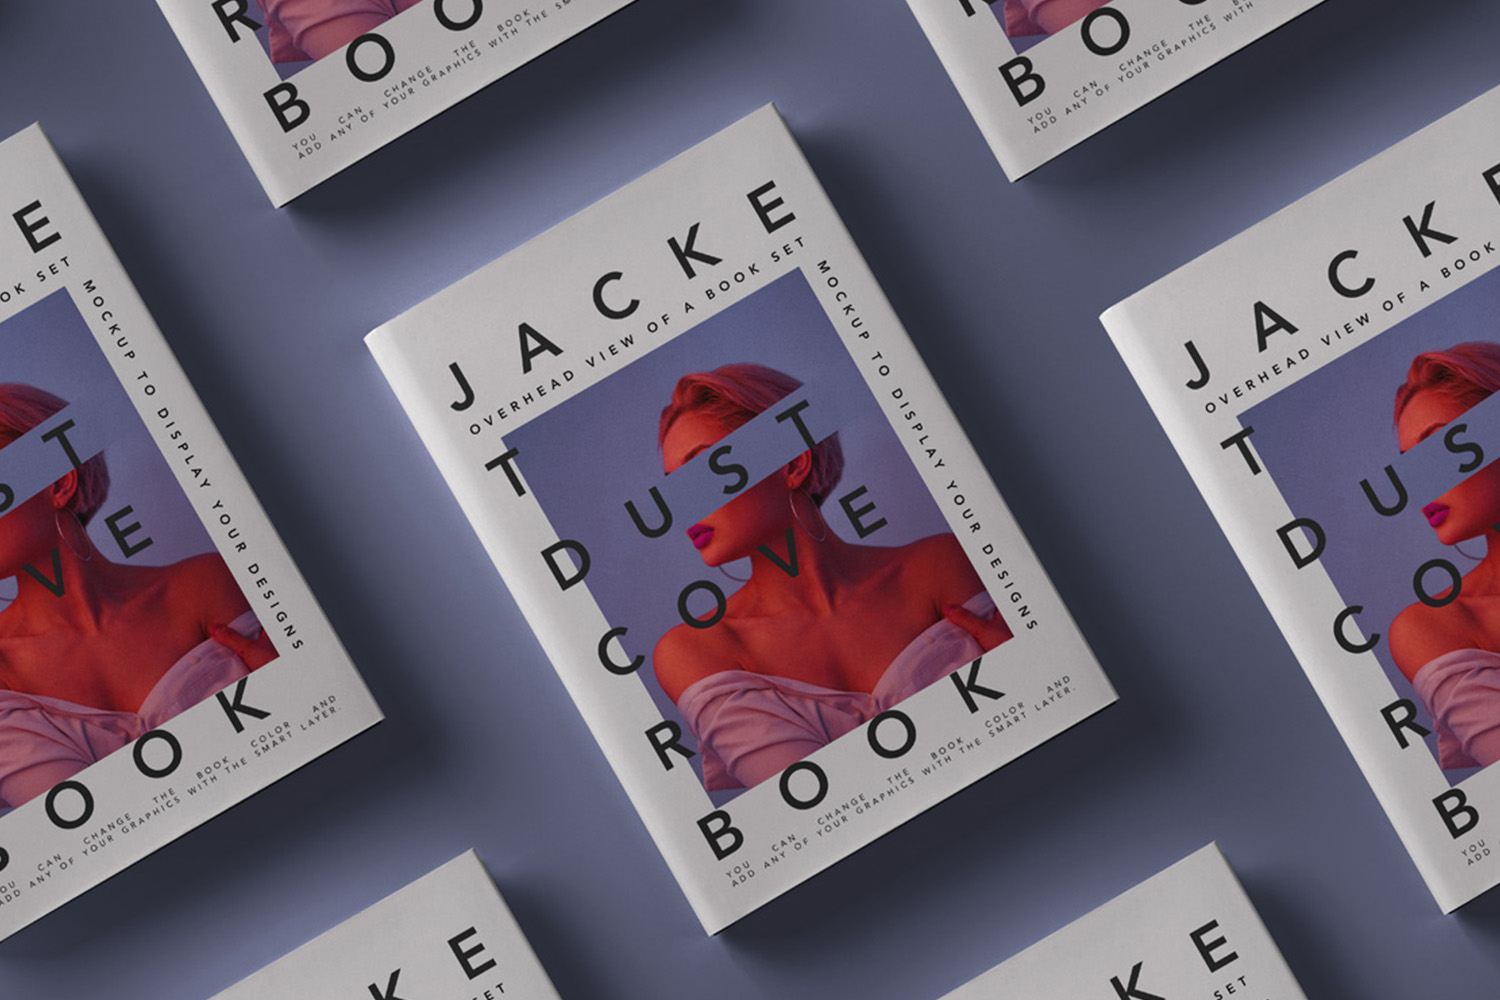 Dust Cover Book Mockup Free Download